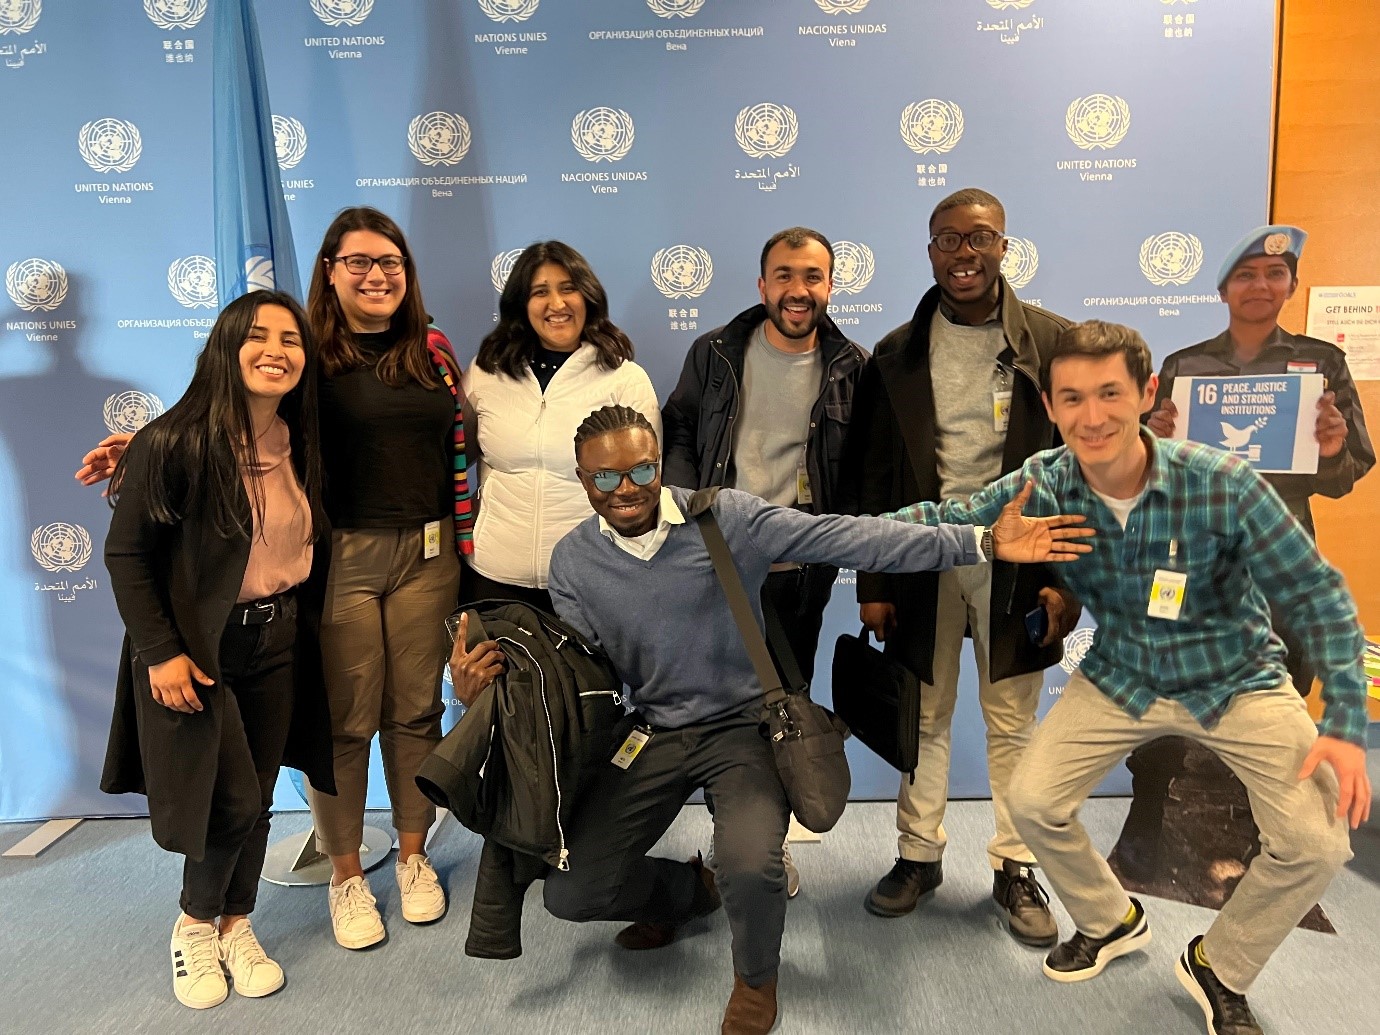 Students visiting the UN Offices in Vienna